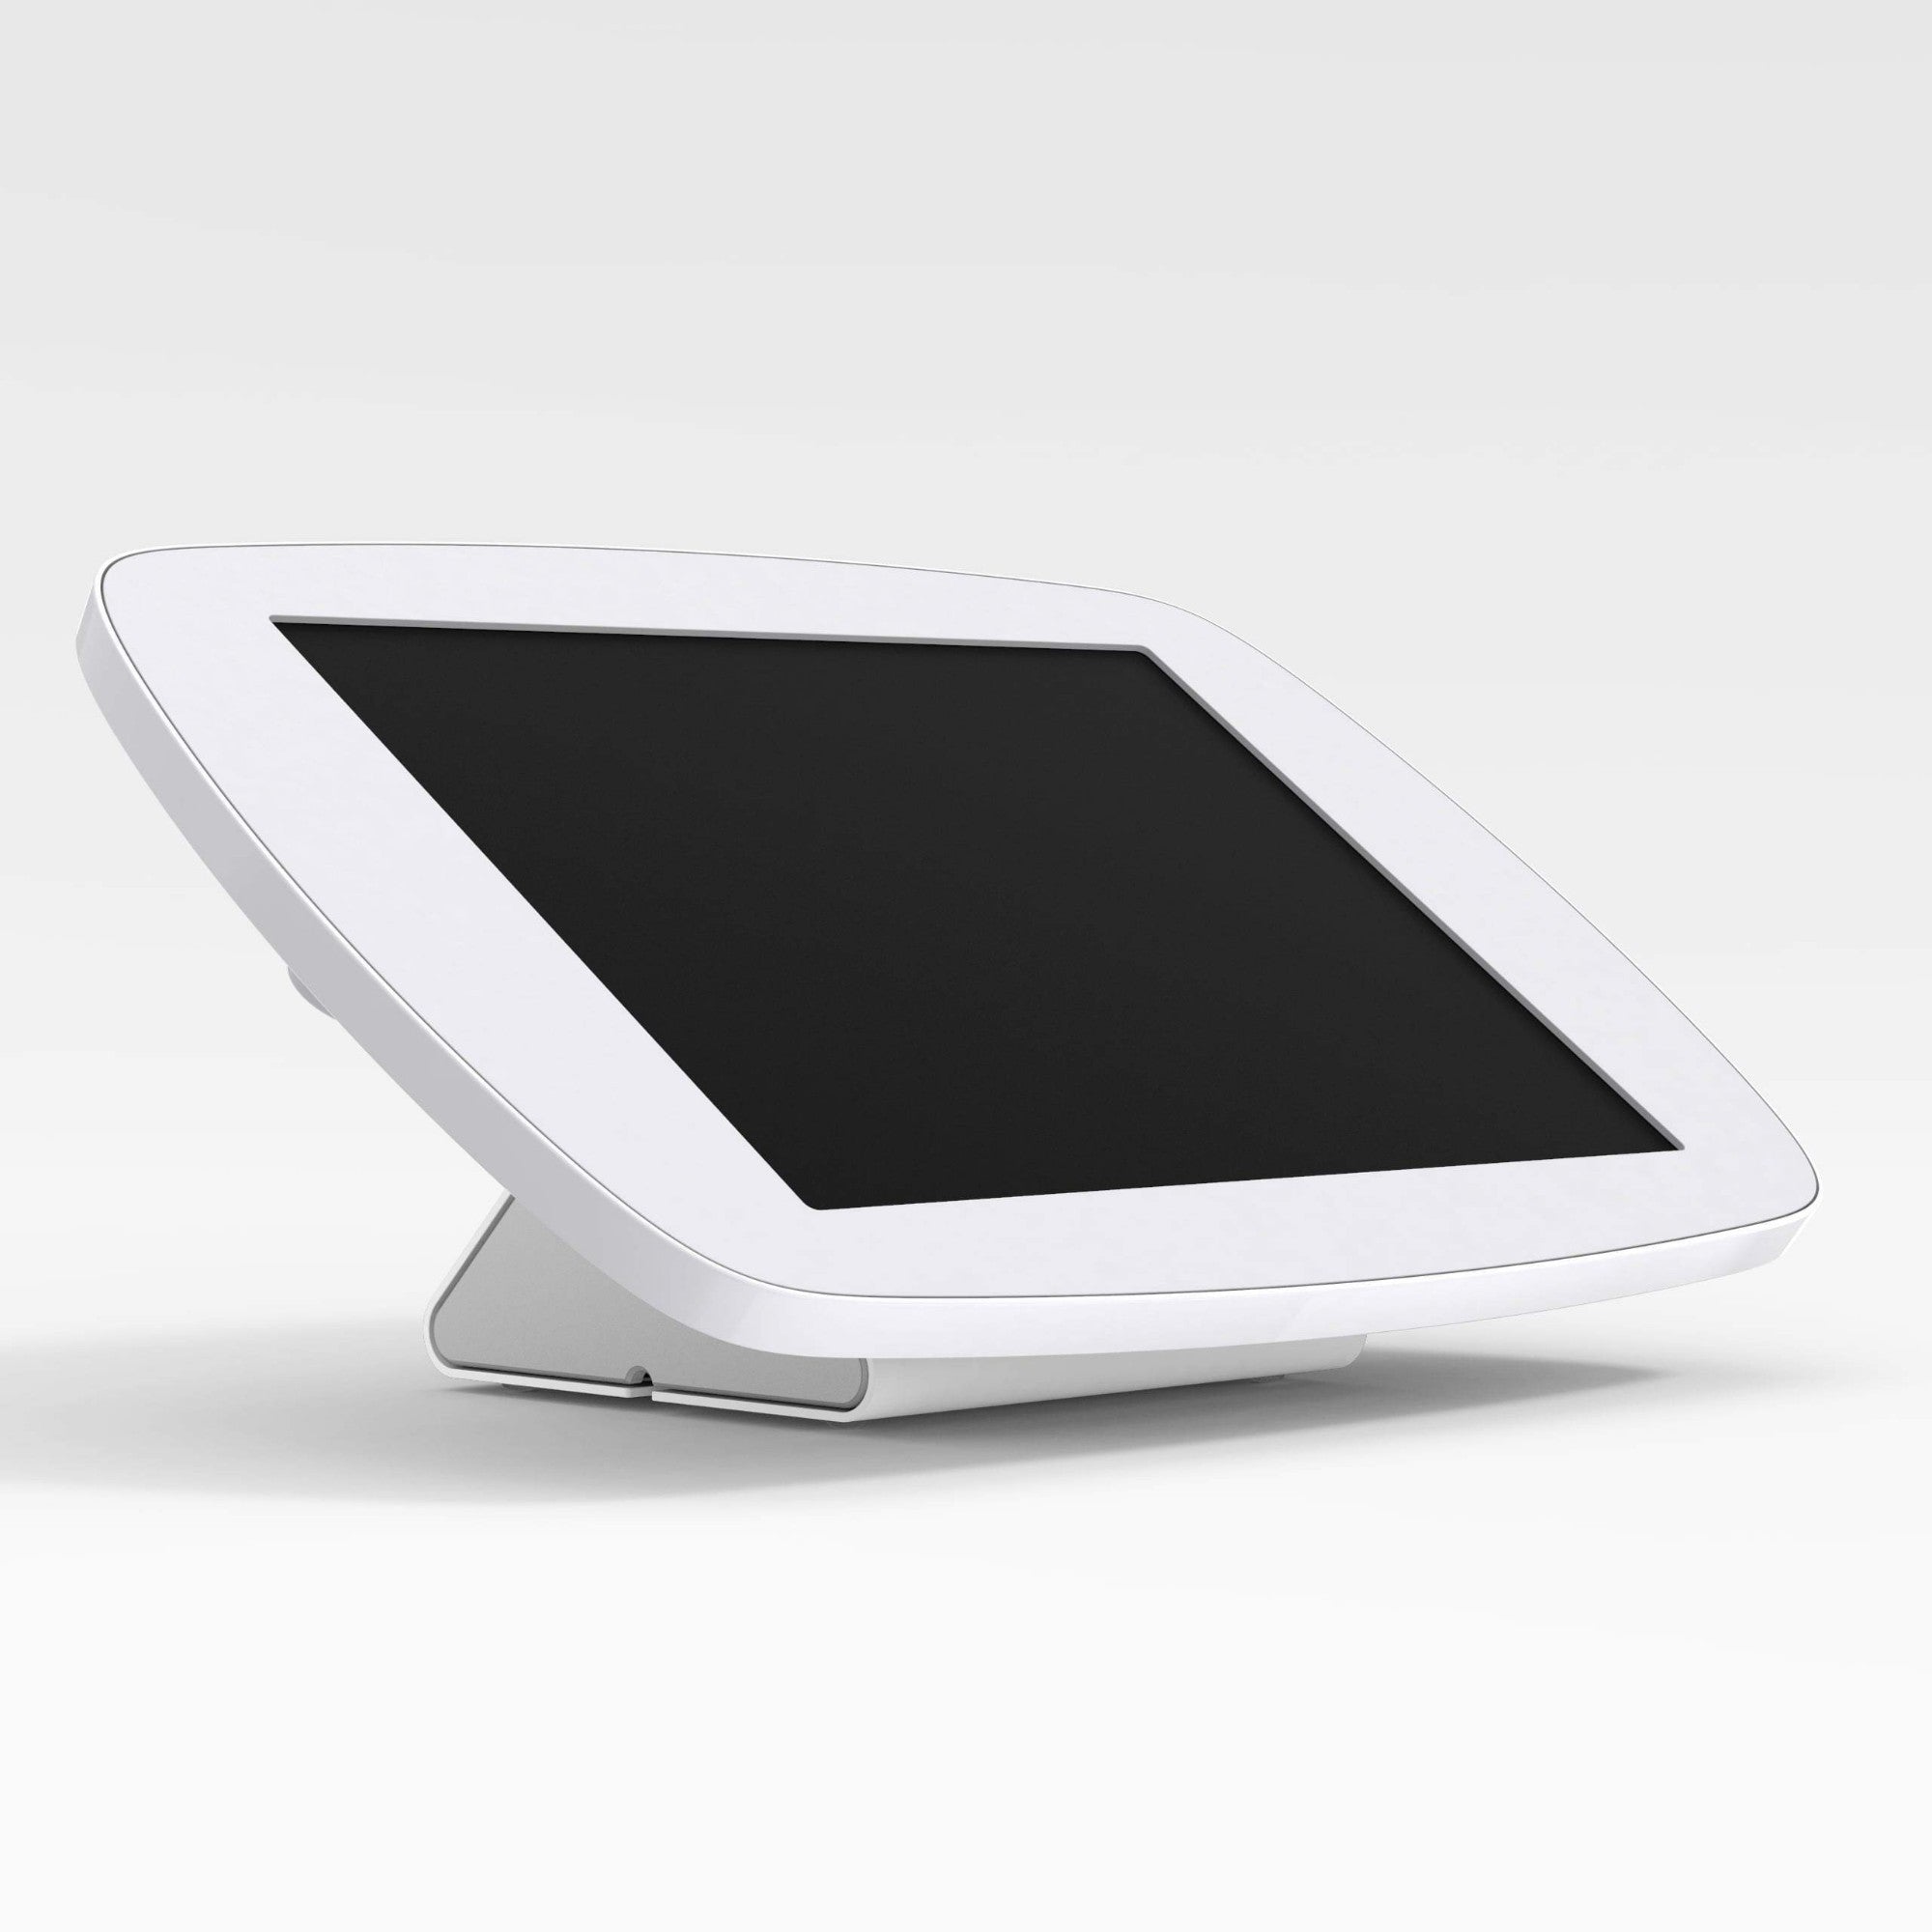 Bouncepad Flip | Microsoft Surface Pro 4/5/6/7 (2015 - 2019) | White | Covered Front Camera and Home Button |